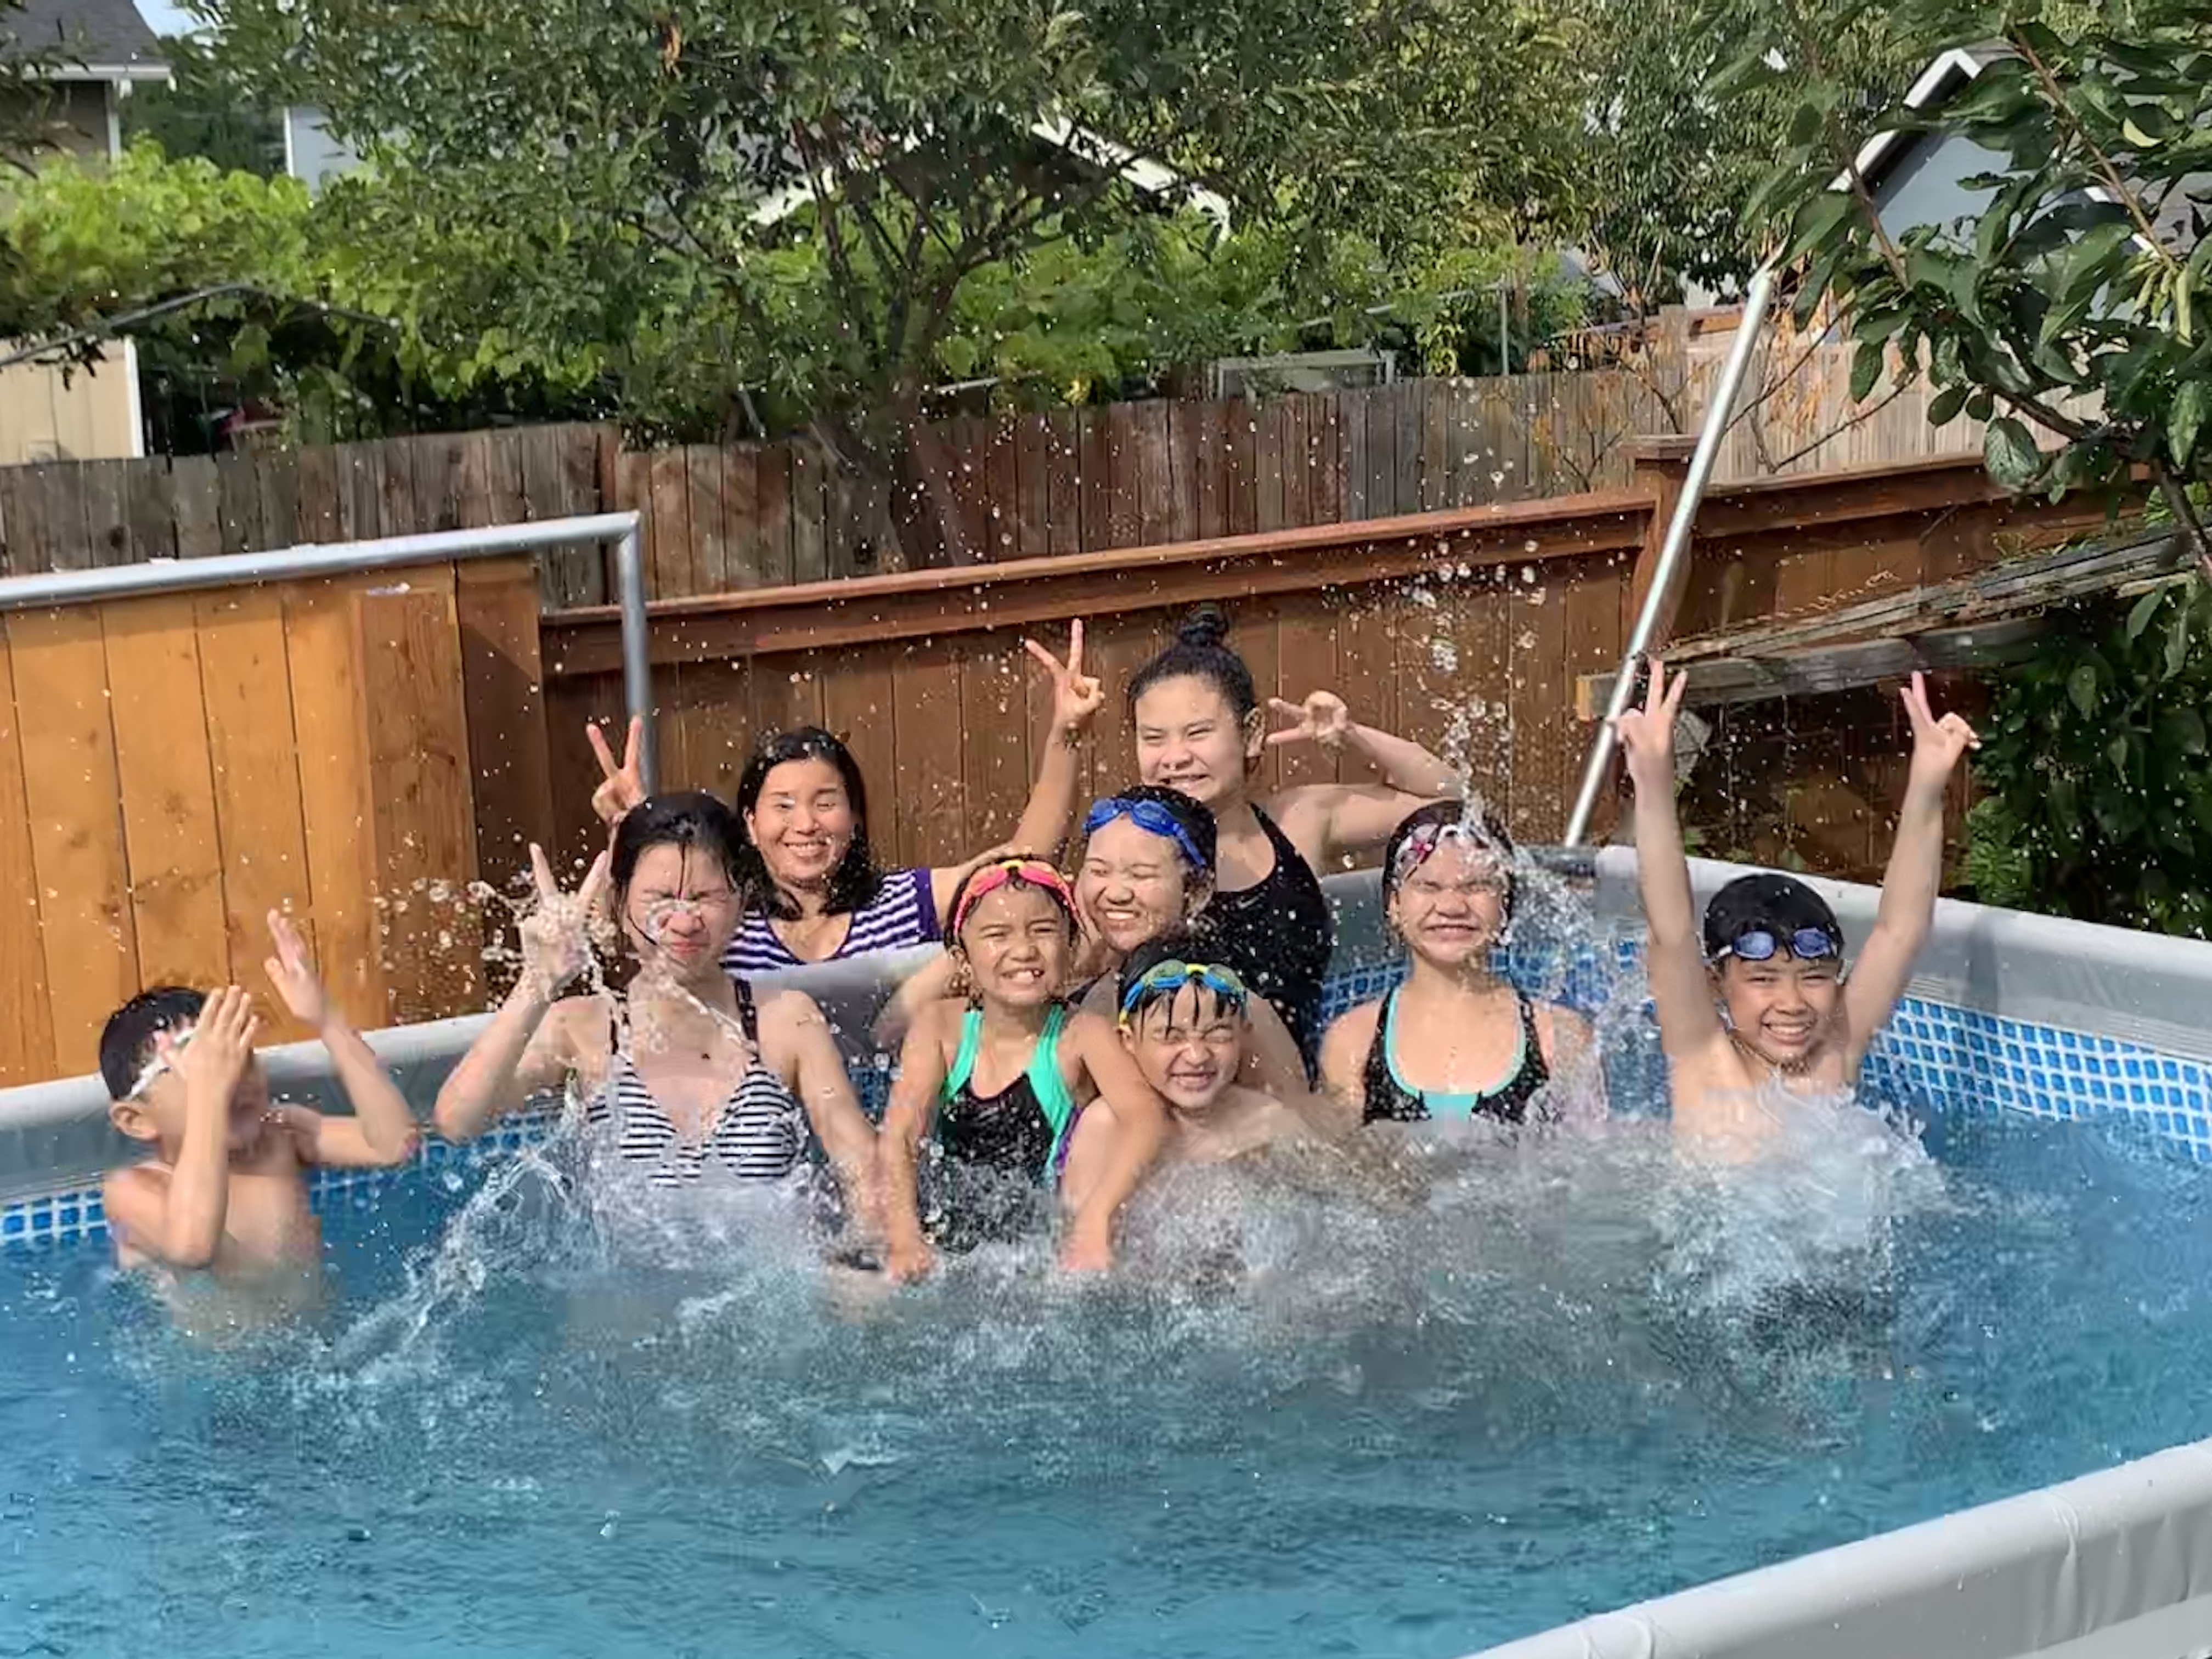  bunch of kids in the pool